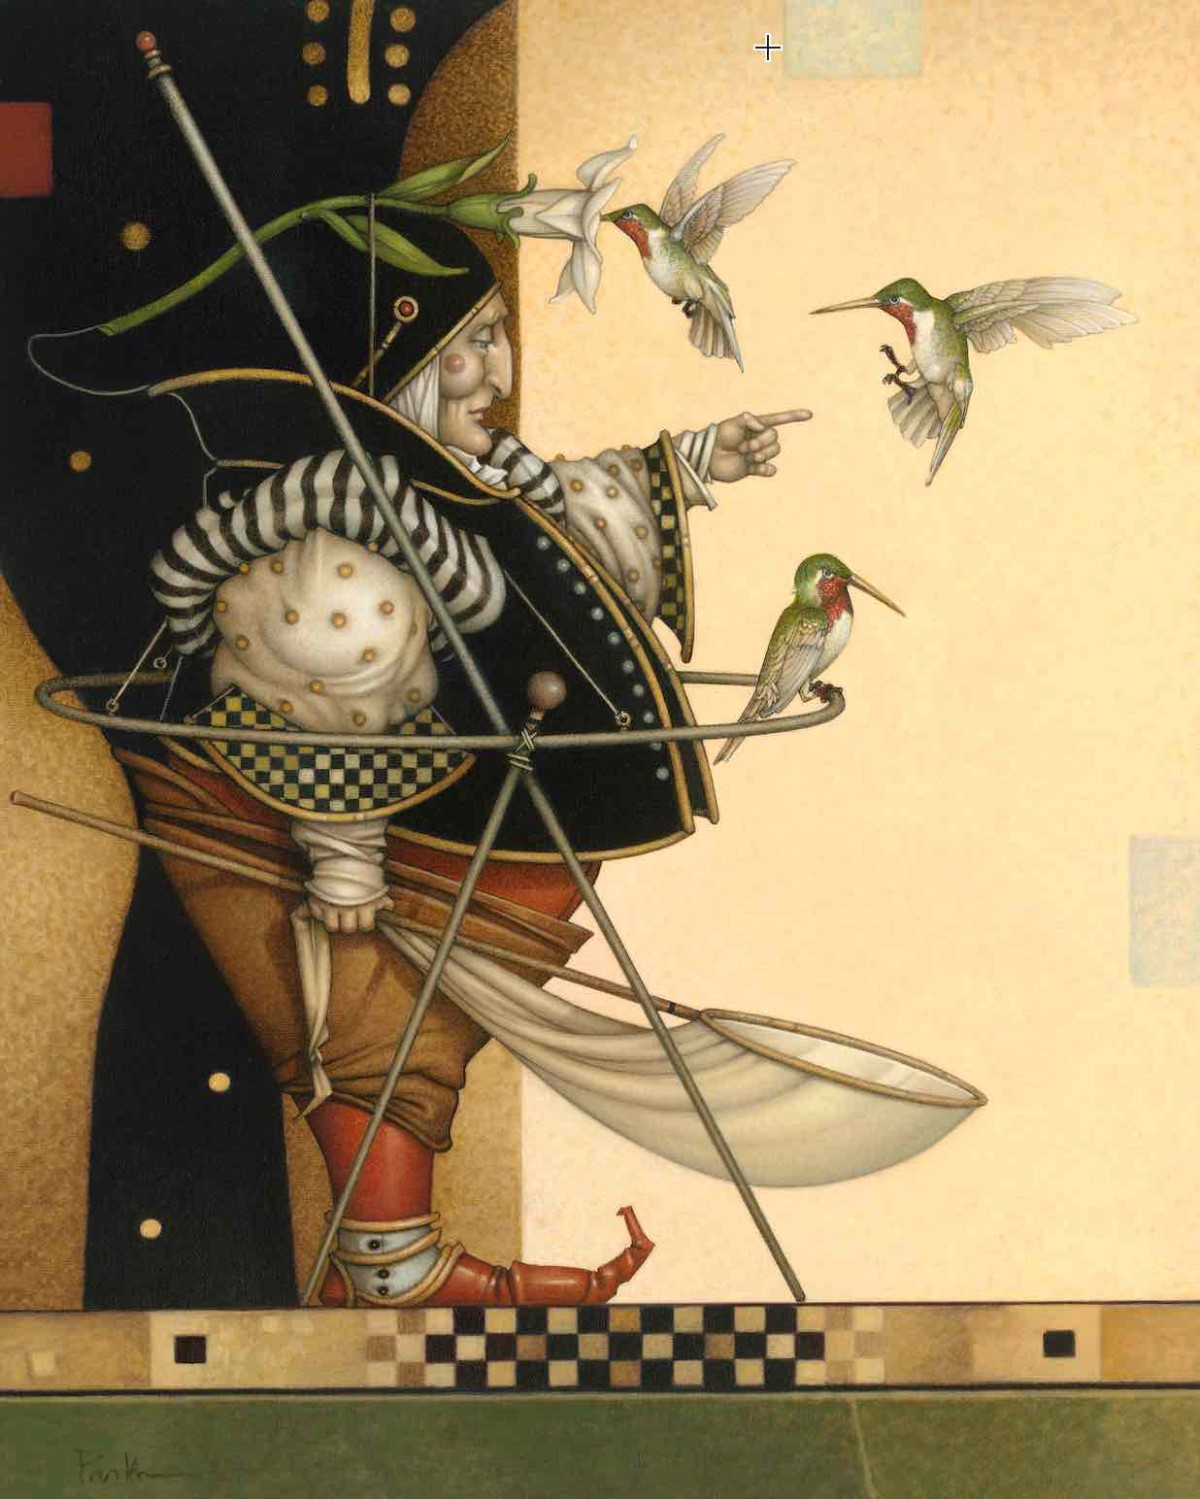 Hummingbird Collector Original Oil Painting by Michael Parkes